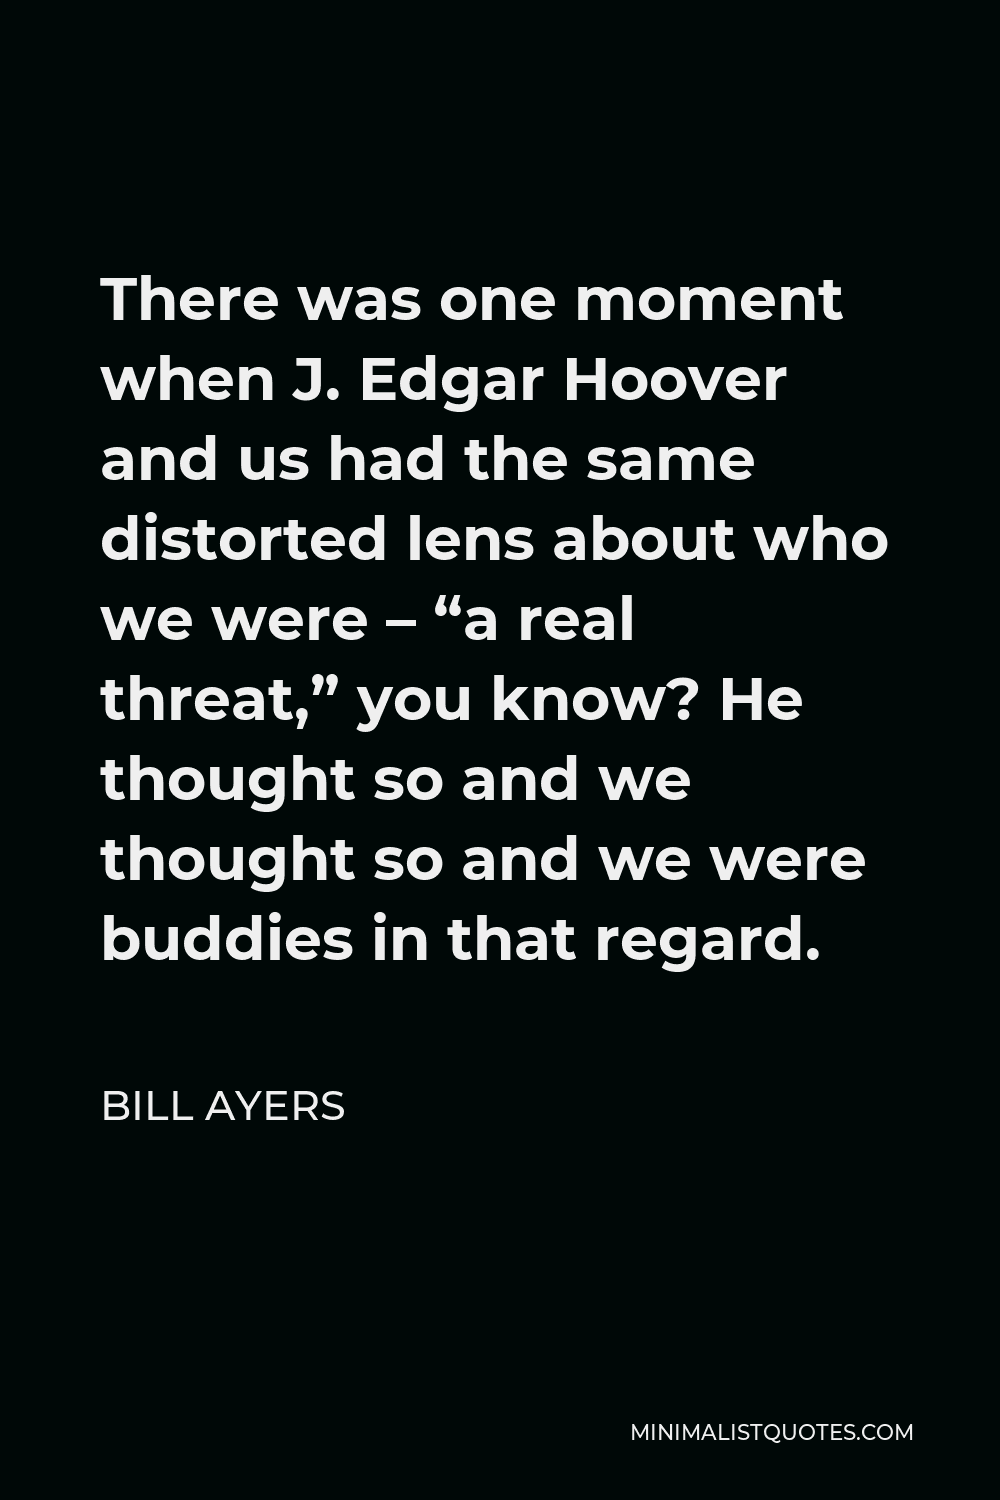 Bill Ayers Quote - There was one moment when J. Edgar Hoover and us had the same distorted lens about who we were – “a real threat,” you know? He thought so and we thought so and we were buddies in that regard.